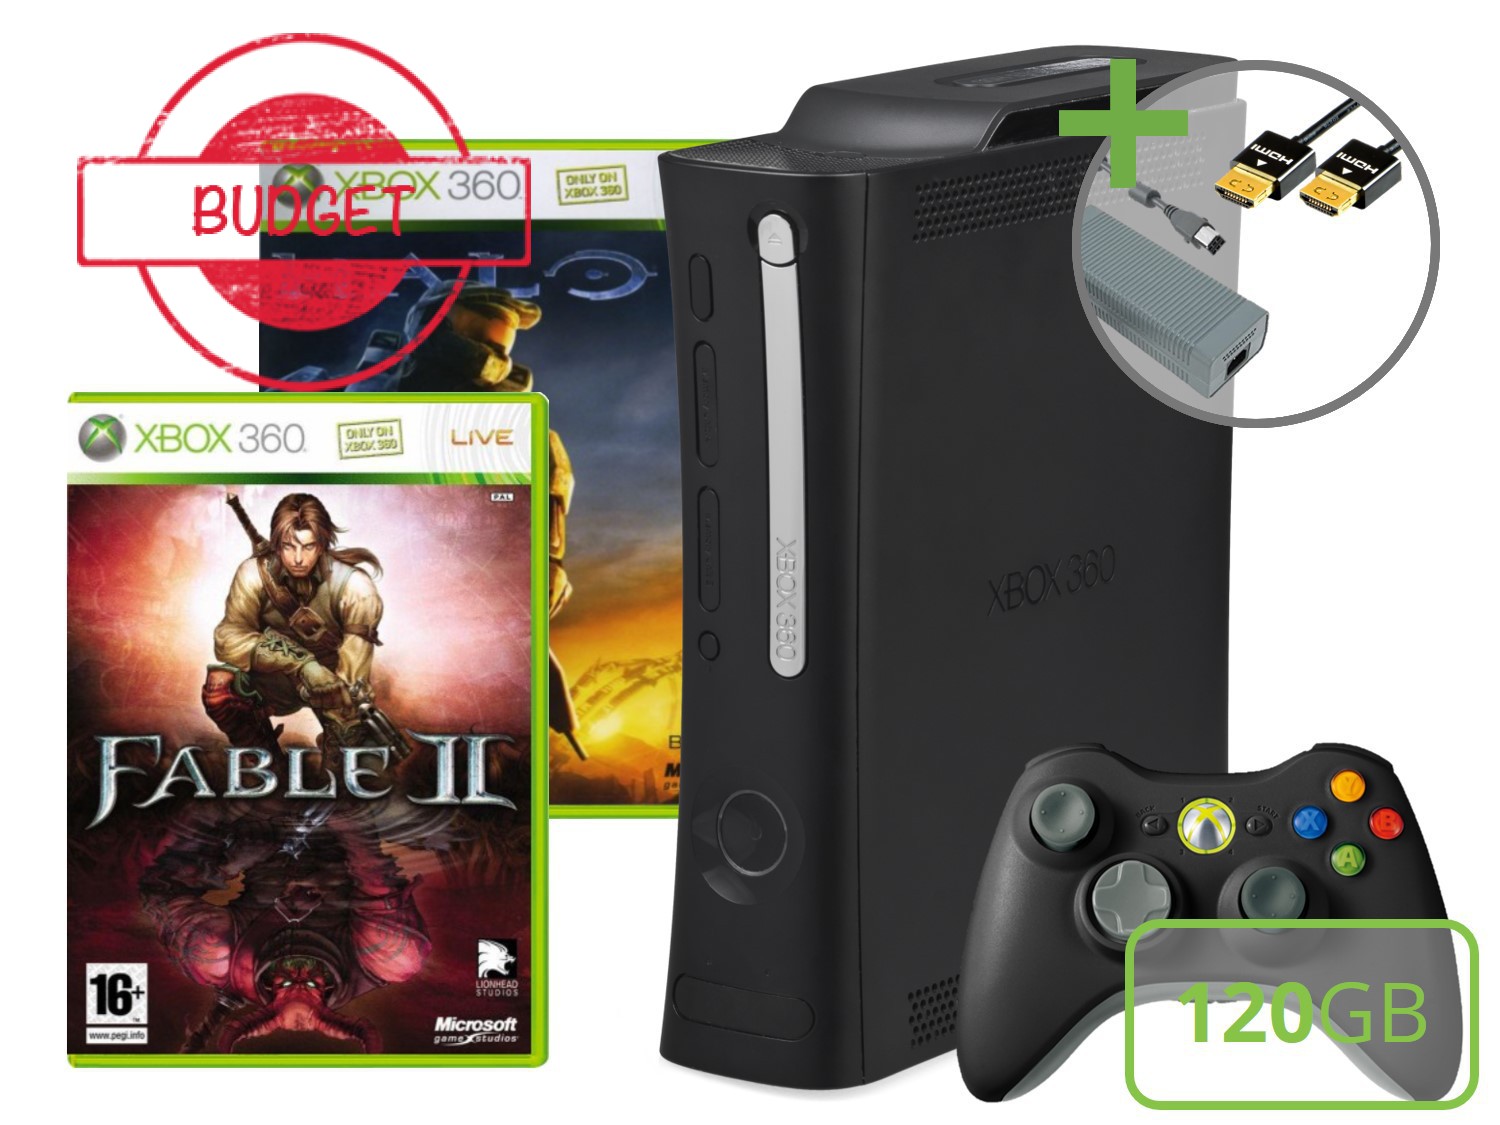 Microsoft Xbox 360 Elite Starter Pack - Fable II and Halo 3 Edition - Budget - Xbox 360 Hardware